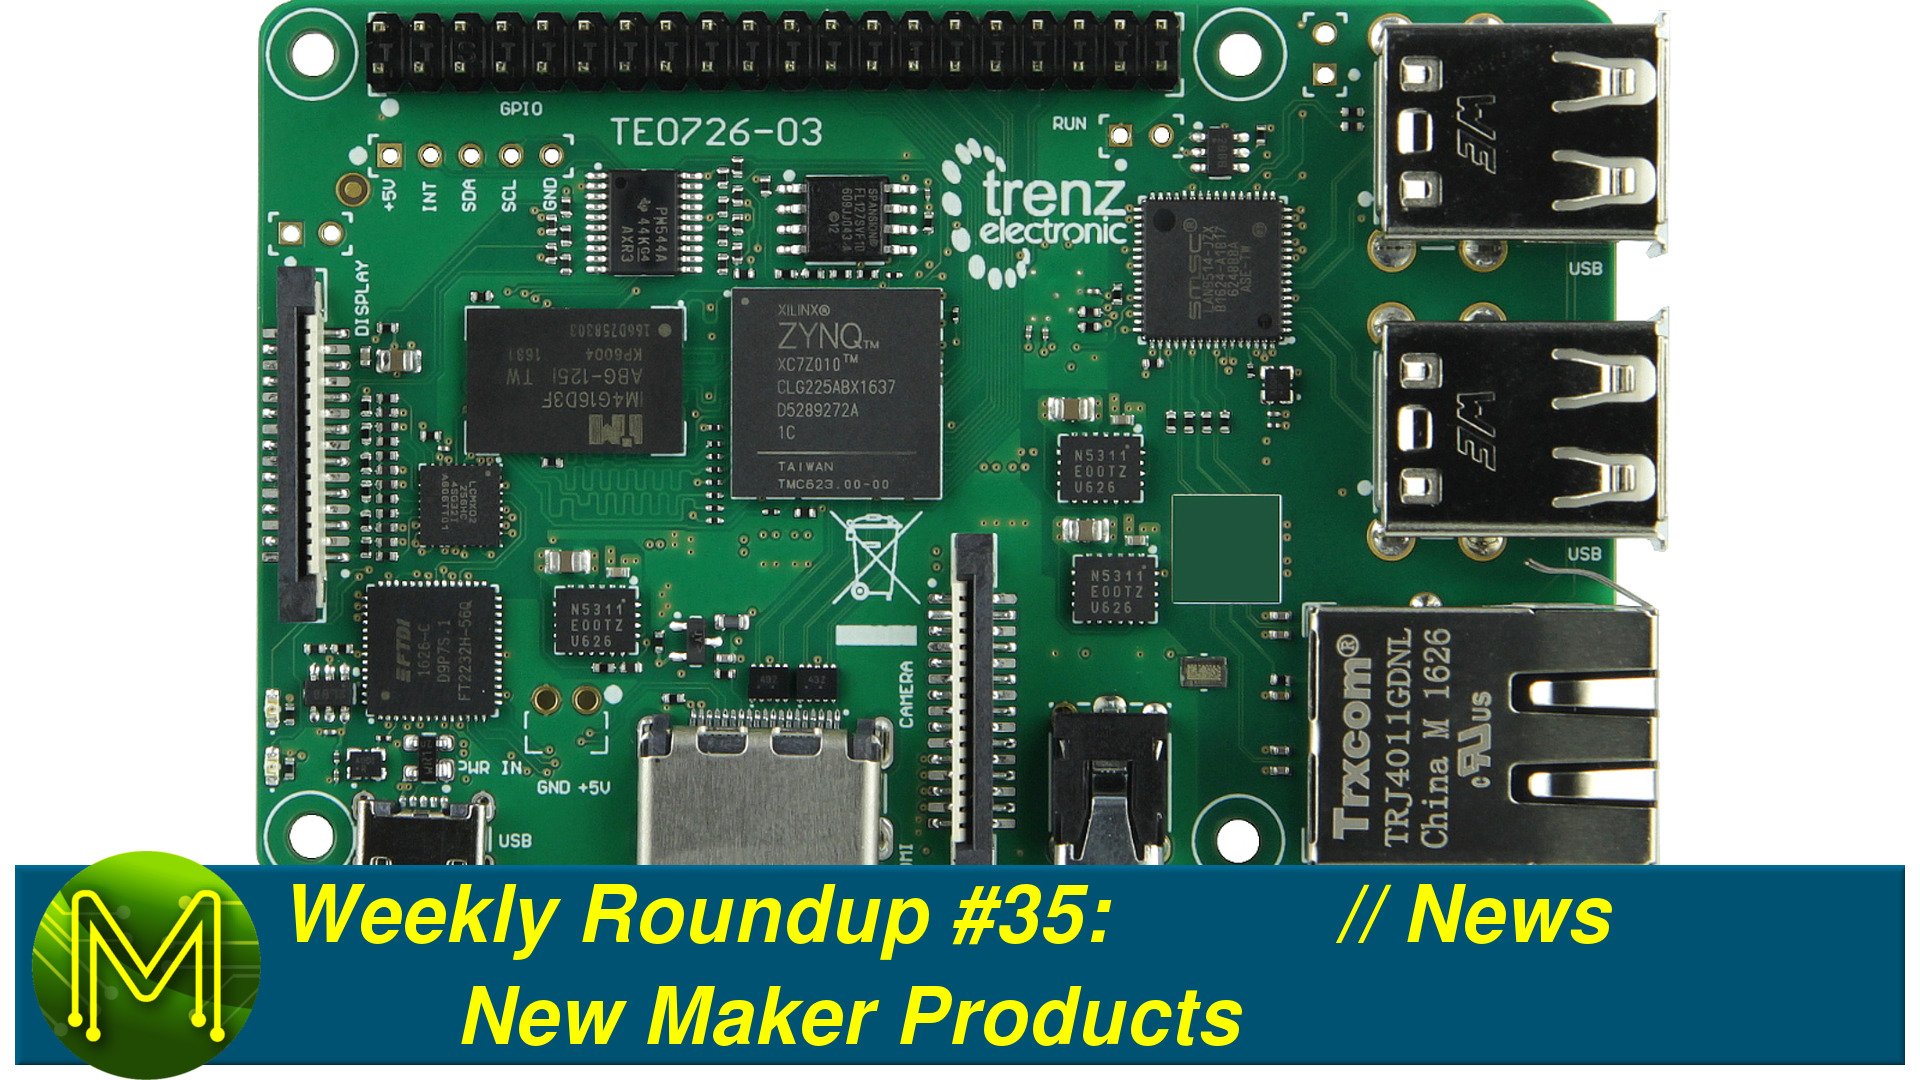 Weekly Roundup #35 - New Maker Products // News